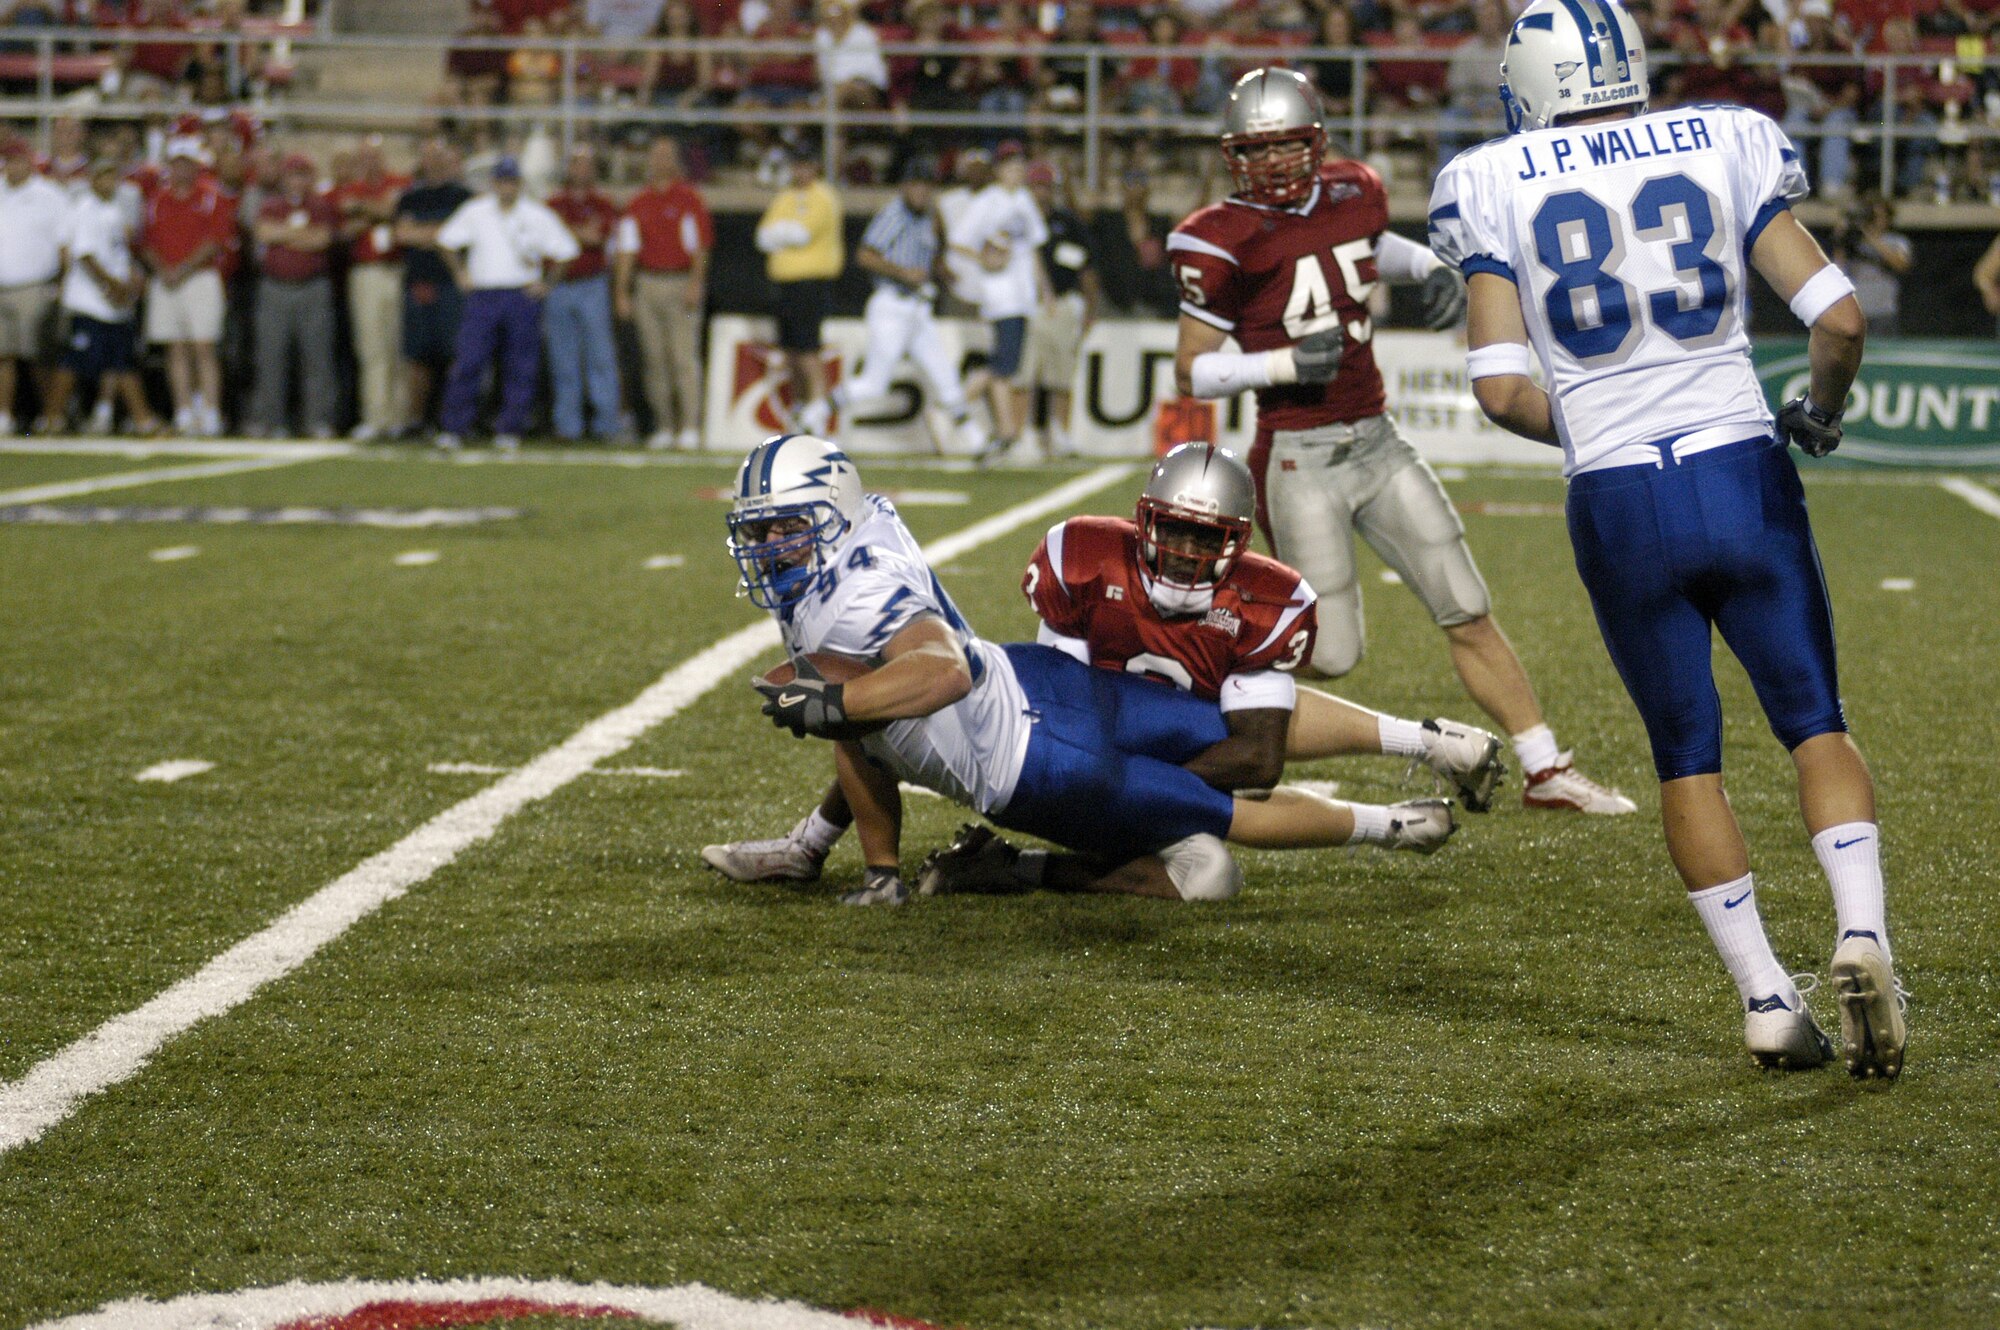 Air Force Academy tight end Carsten Stahr checks to see if he made the first down after pulling in a pass in the red zone. By adding 139 yards of passing to their triple-option ground attack, the Falcons defeated University of Nevada-Las Vegas 27-10 in their Sept. 18 conference opener and advanced to 2-1. The Falcons next play No. 15 Utah on Sept. 25. (U.S. Air Force photo by John Van Winkle)